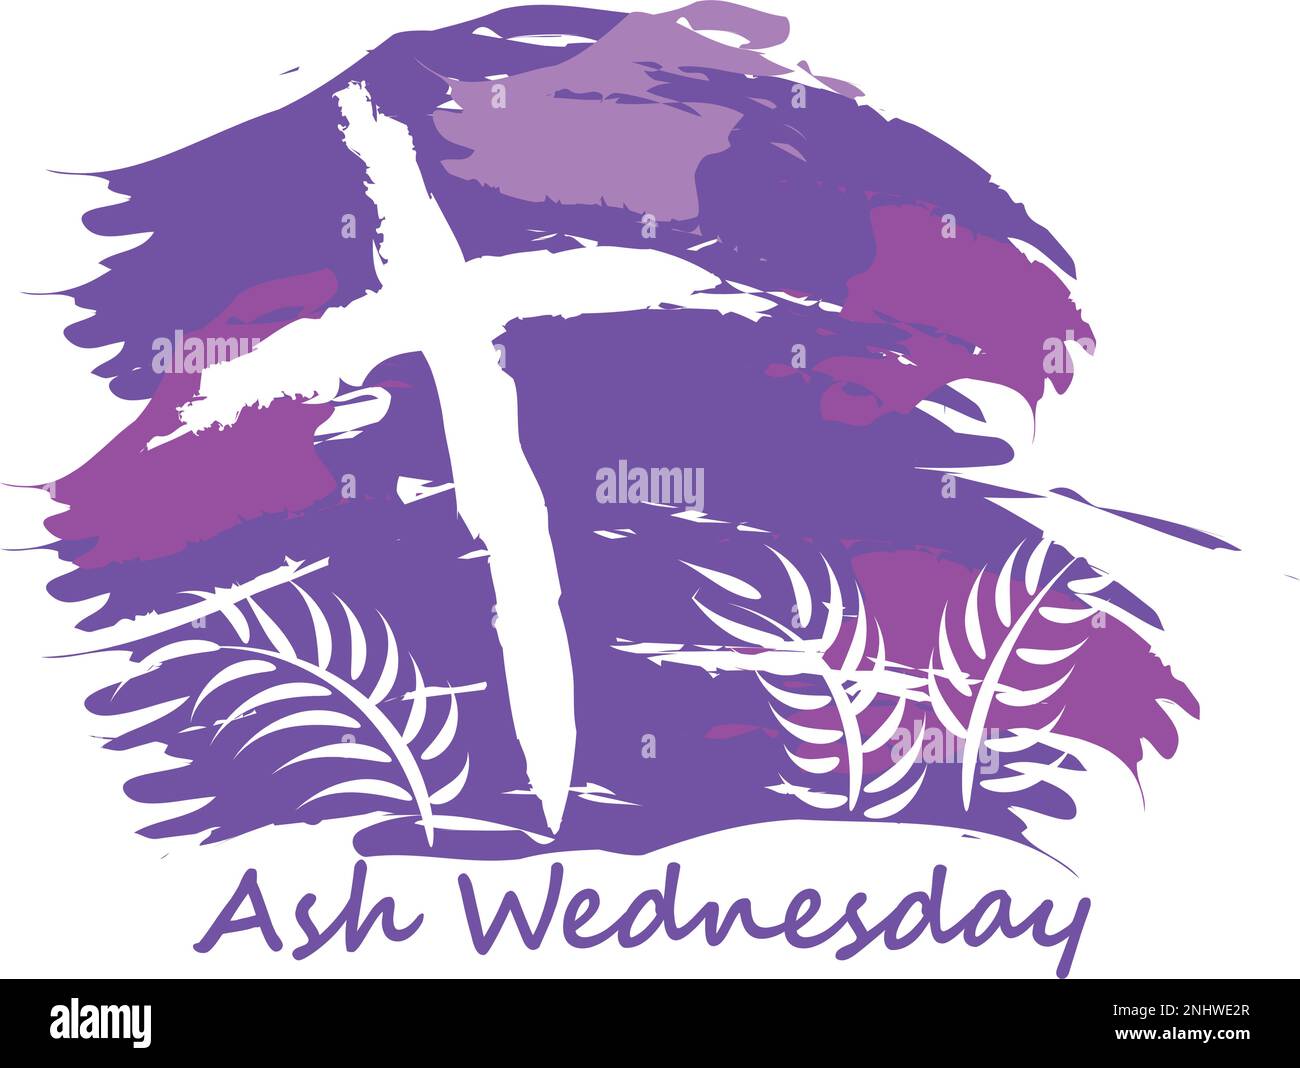 Ash Wednesday Cross Vector Art. Ash Wednesday With Cross, Blessing